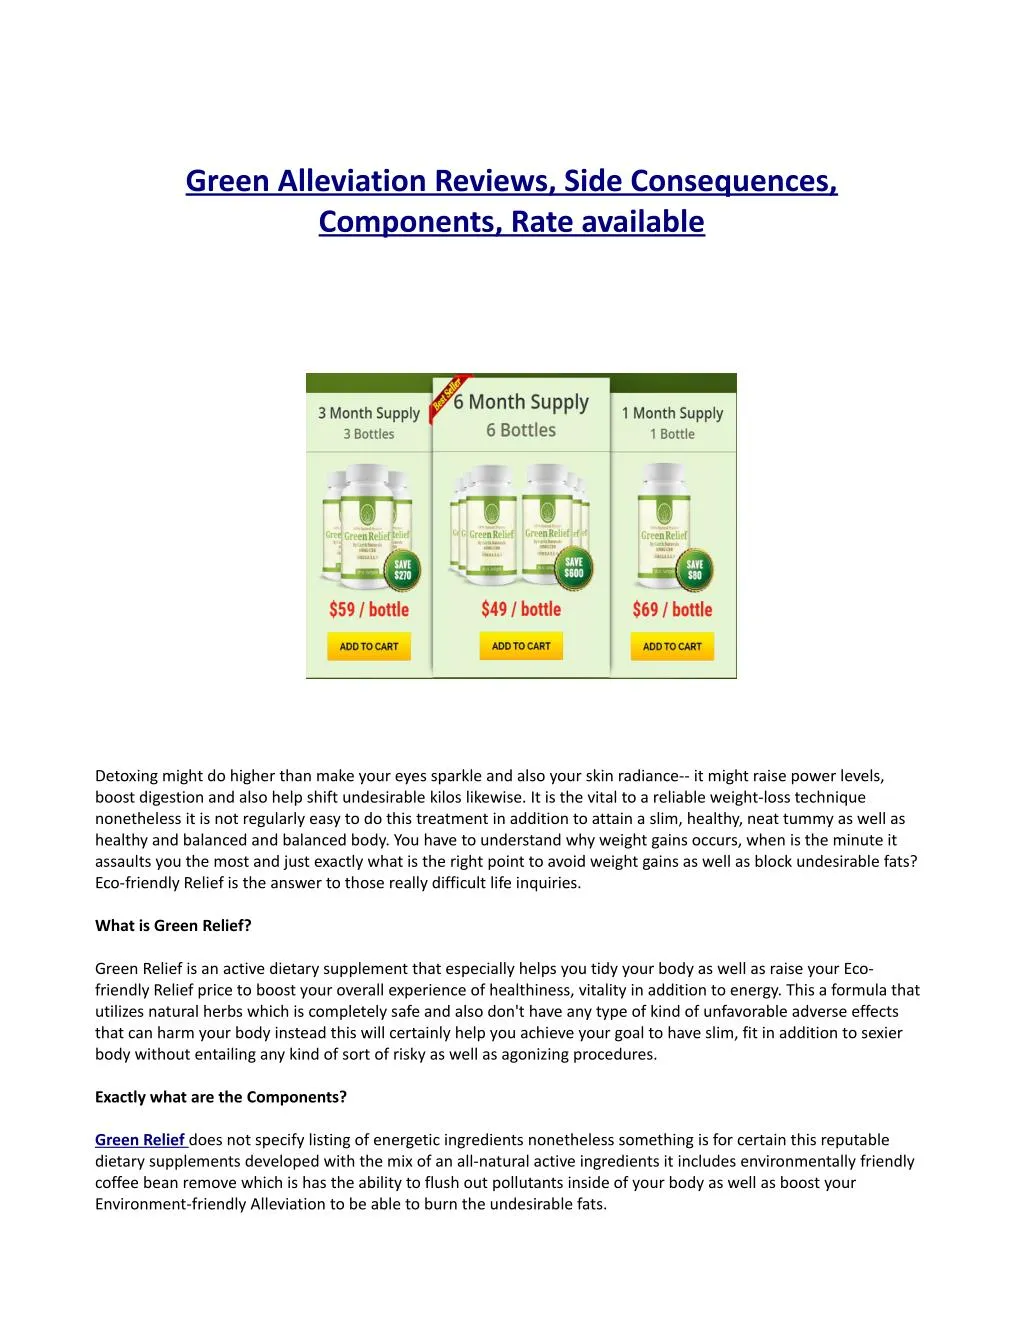 green alleviation reviews side consequences